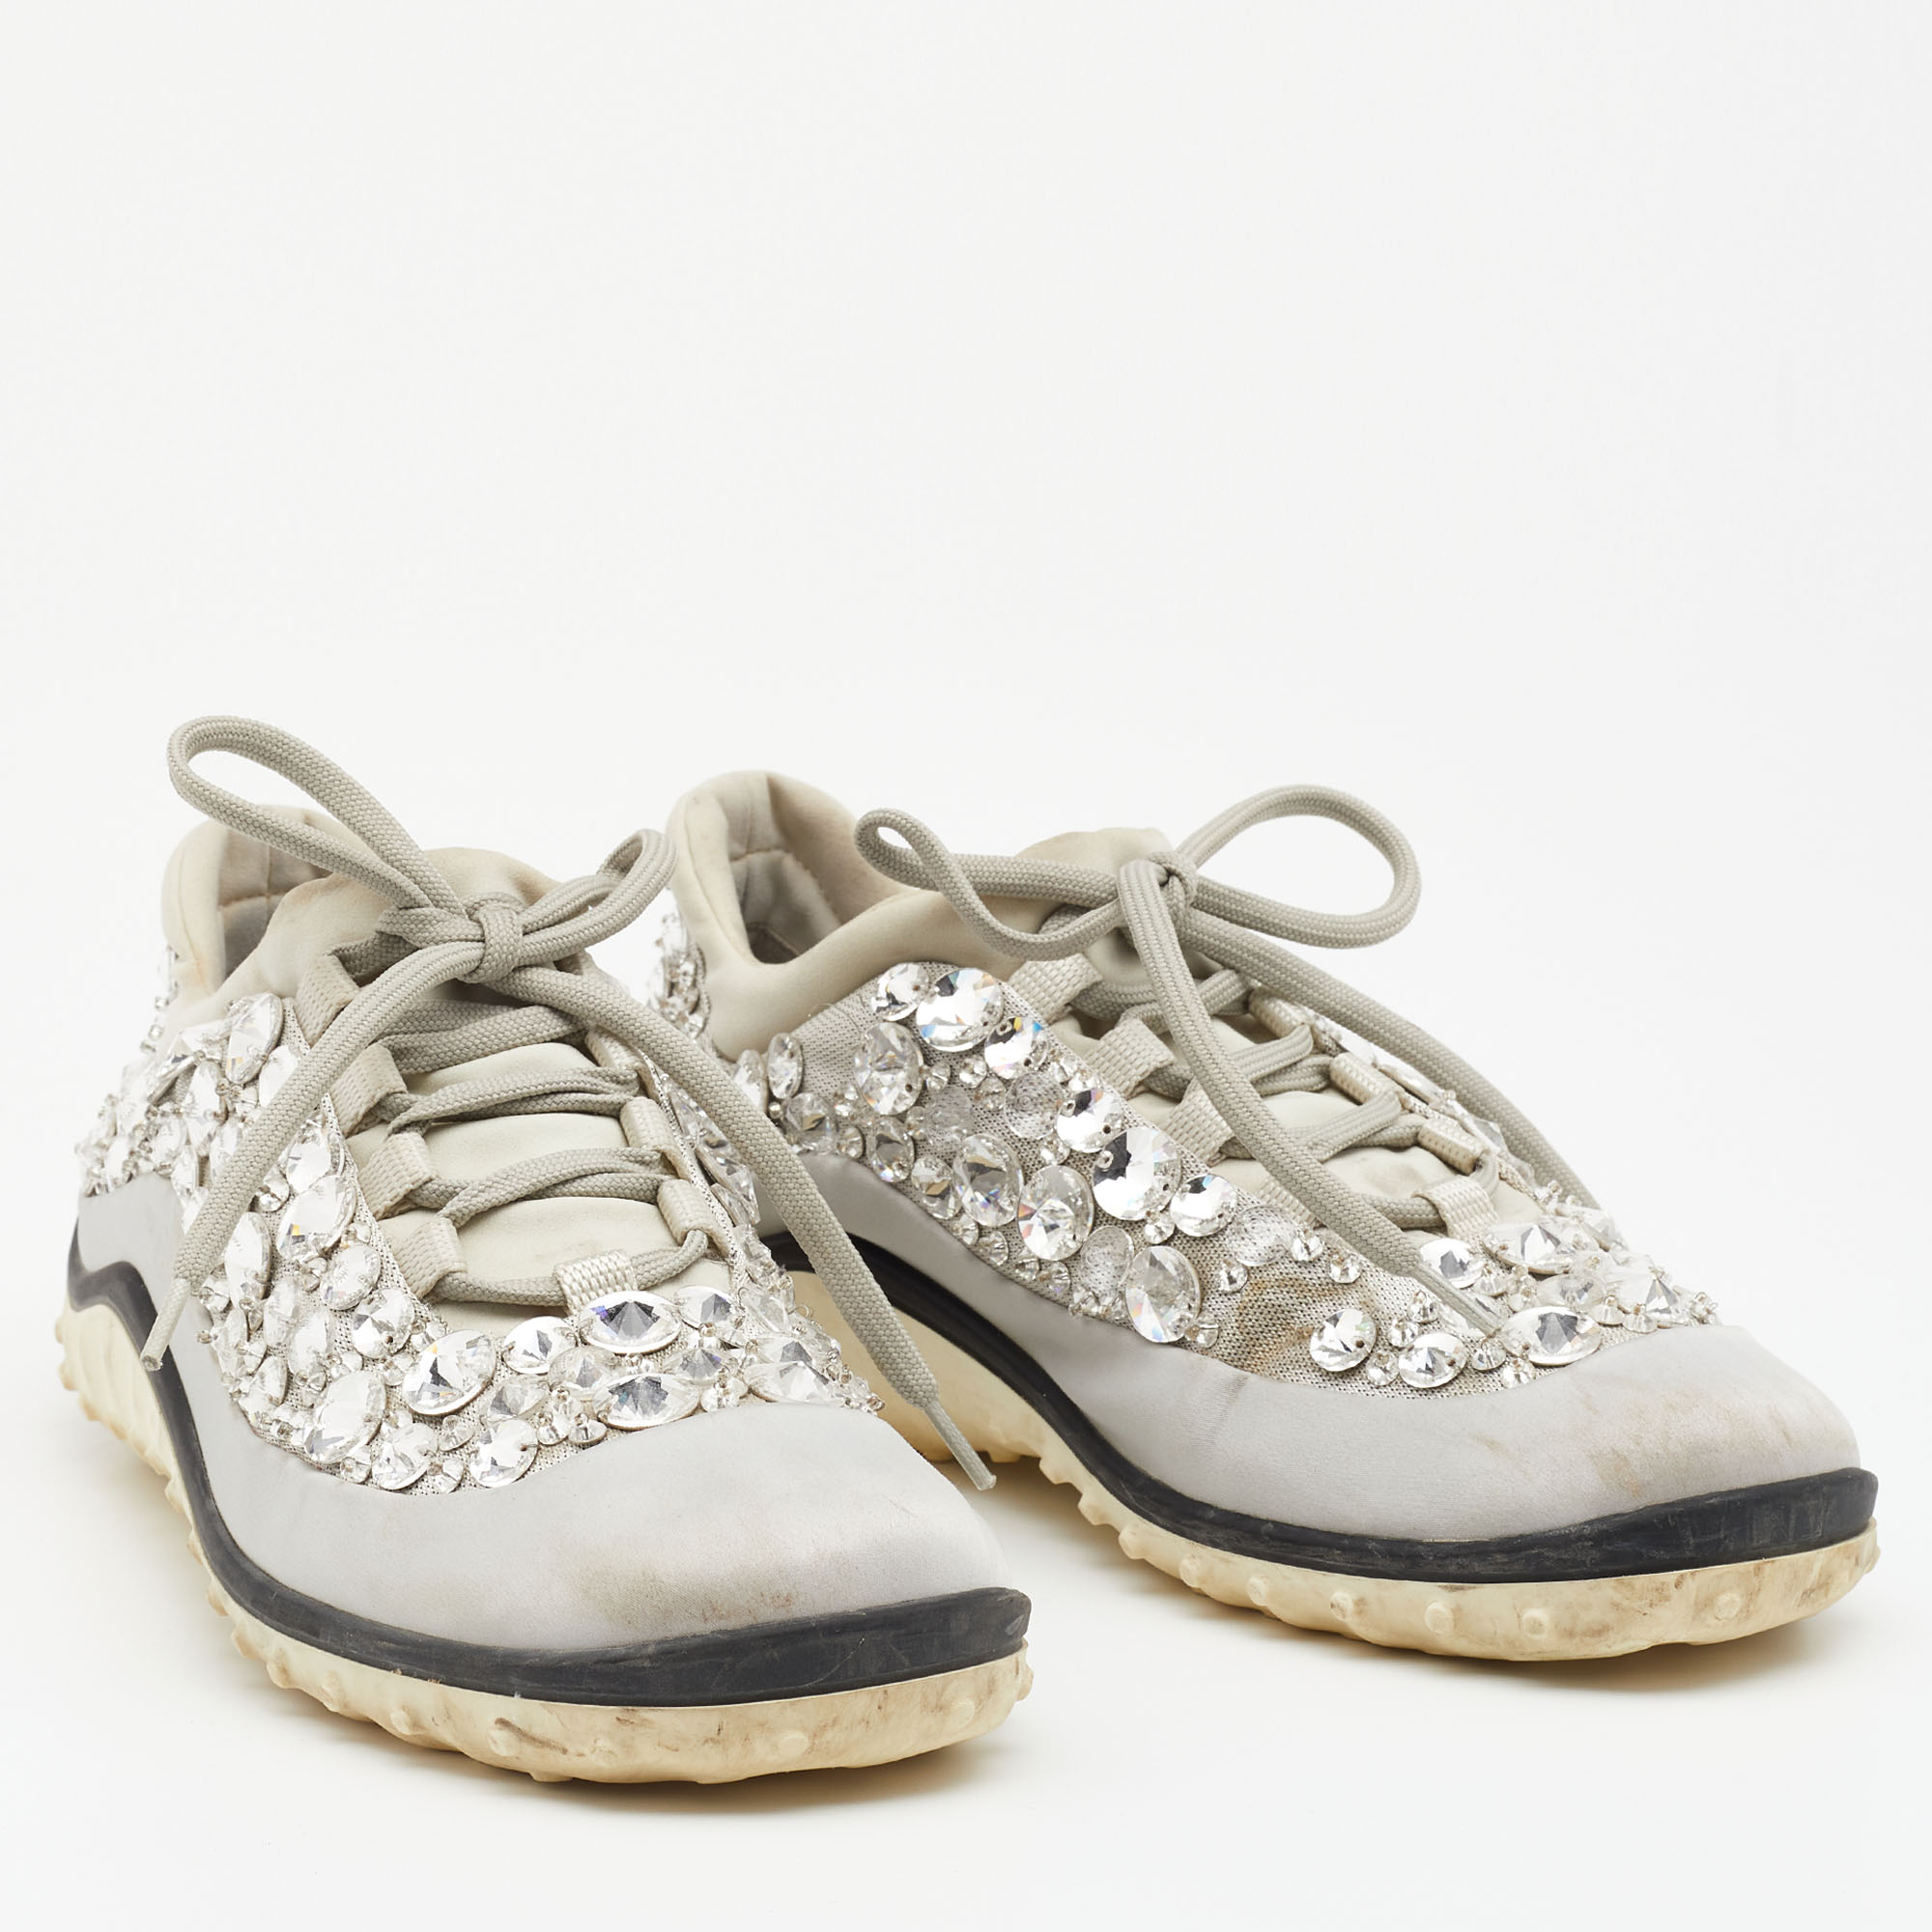 Miu Miu Grey Satin And Stretch Fabric Astro Crystal Embellished Low Top Sneakers Size 36